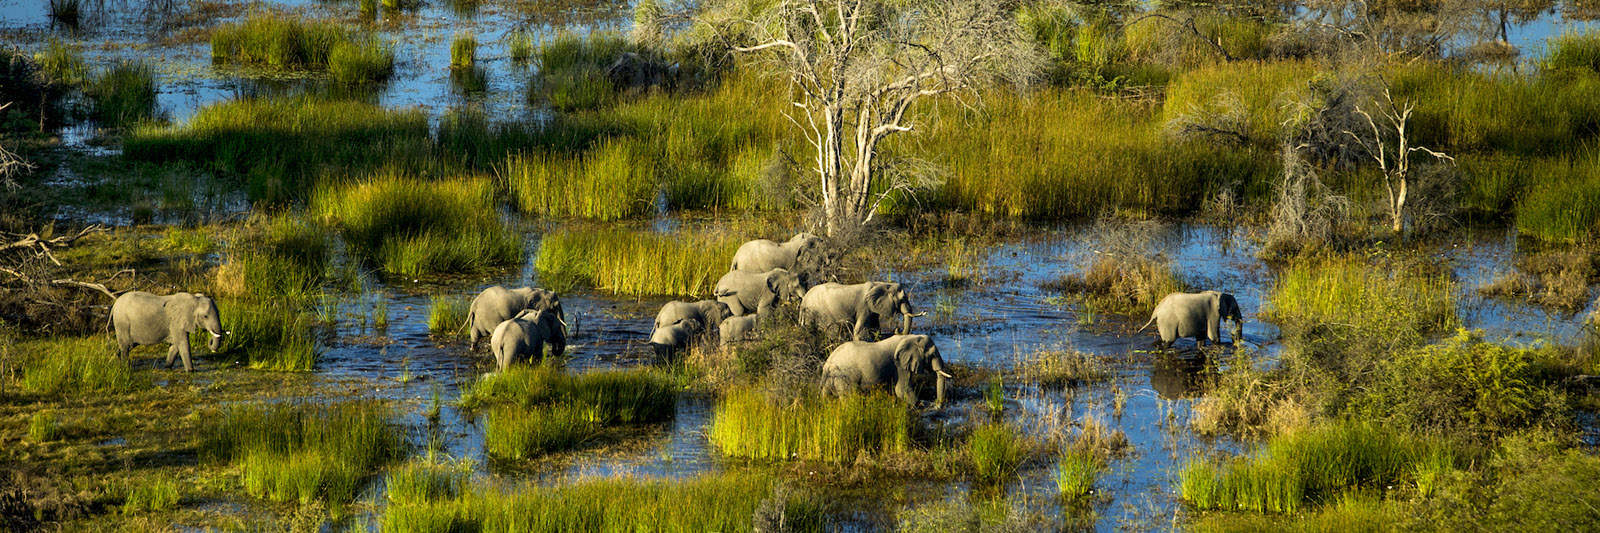 10 Quick Facts About Botswana (that will make you want to go there)